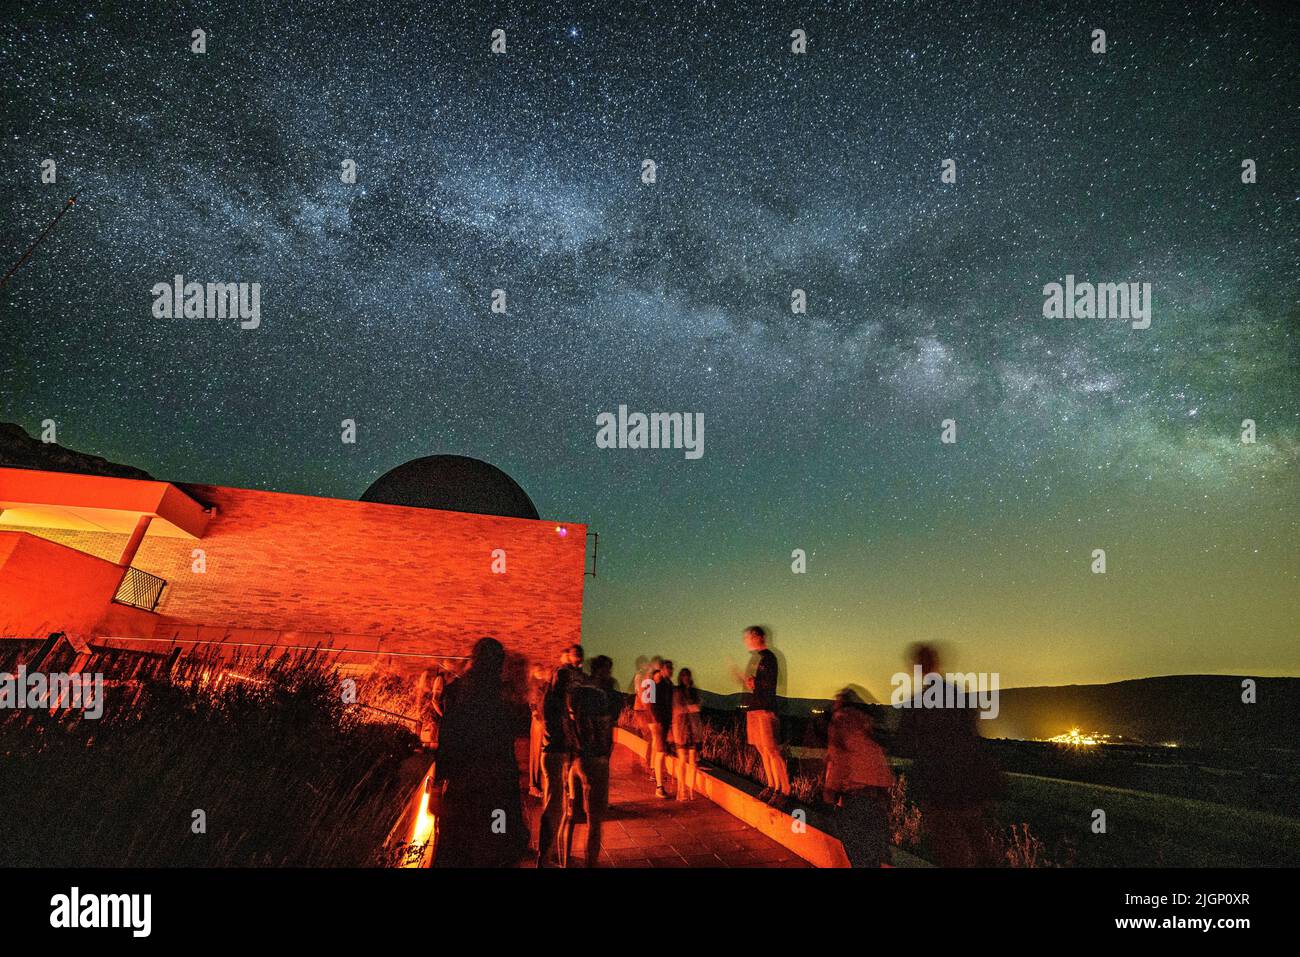 Montsec Astronomical Observatory at night with the Milky Way (Àger, Lleida, Catalonia, Spain) ESP: Observatorio Astronómico del Montsec de noche Stock Photo